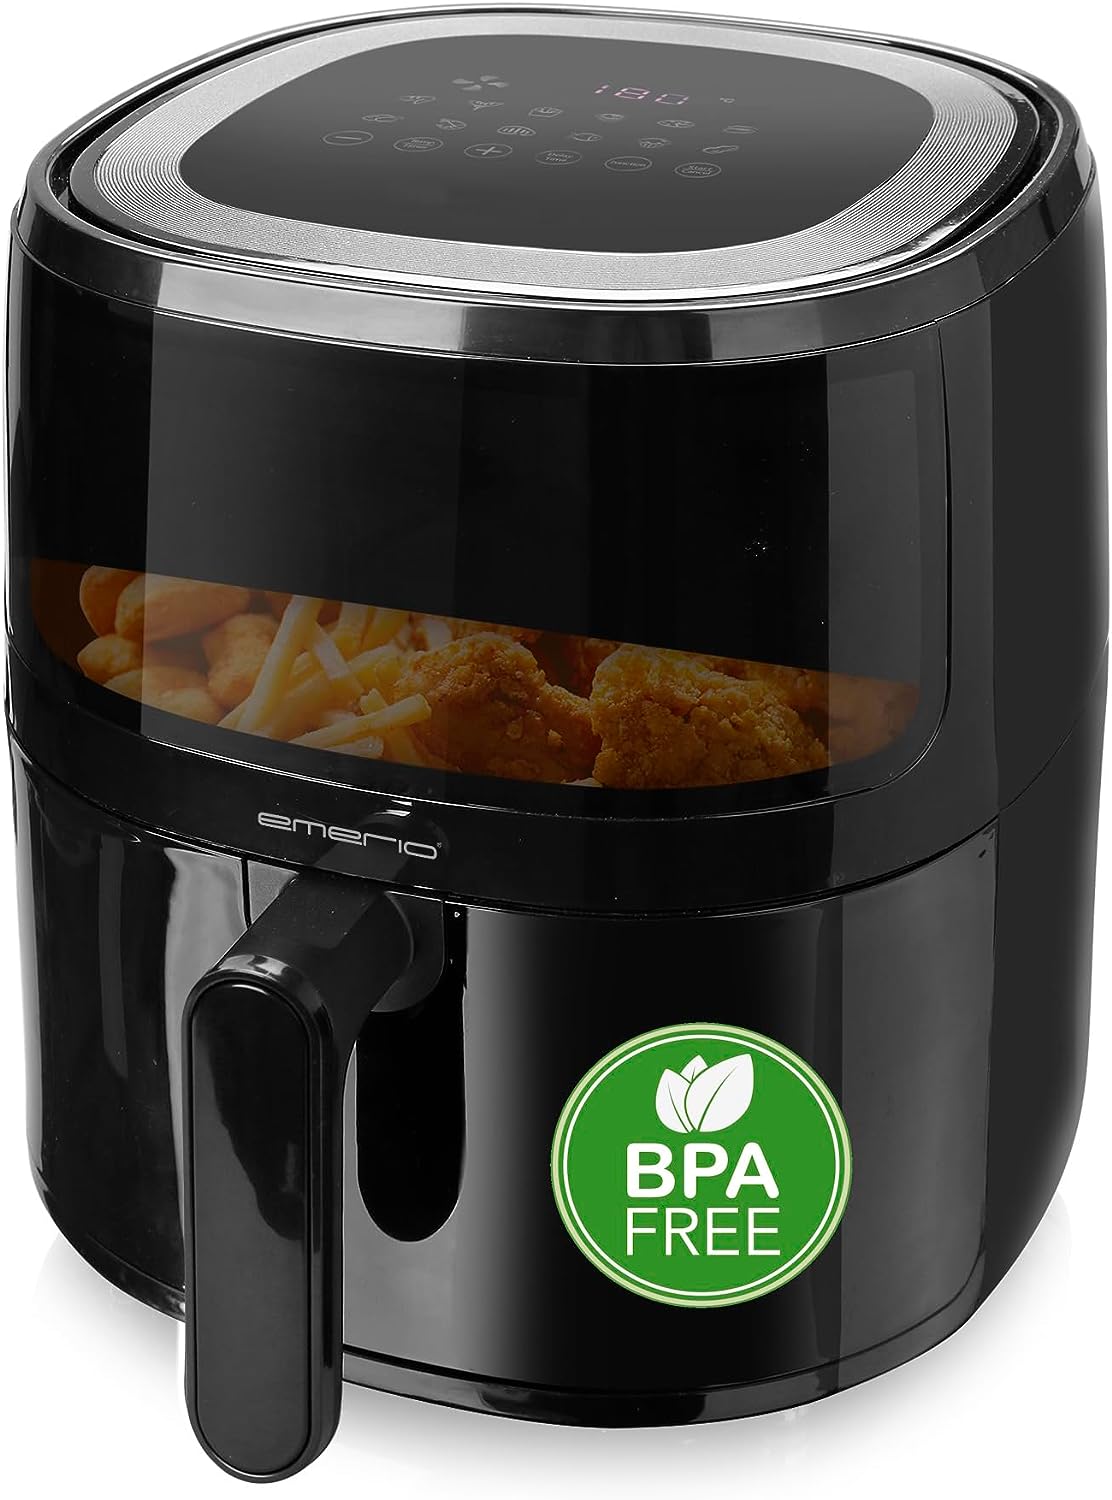 Emerio AF-129329.3 Digital Hot Air Fryer with Viewing Window, Frying without Additional Oil, 5 Litre Volume, 12 Automatic Programmes, Cool Touch, BPA-Free, Fast Heating, 1500 Watt,